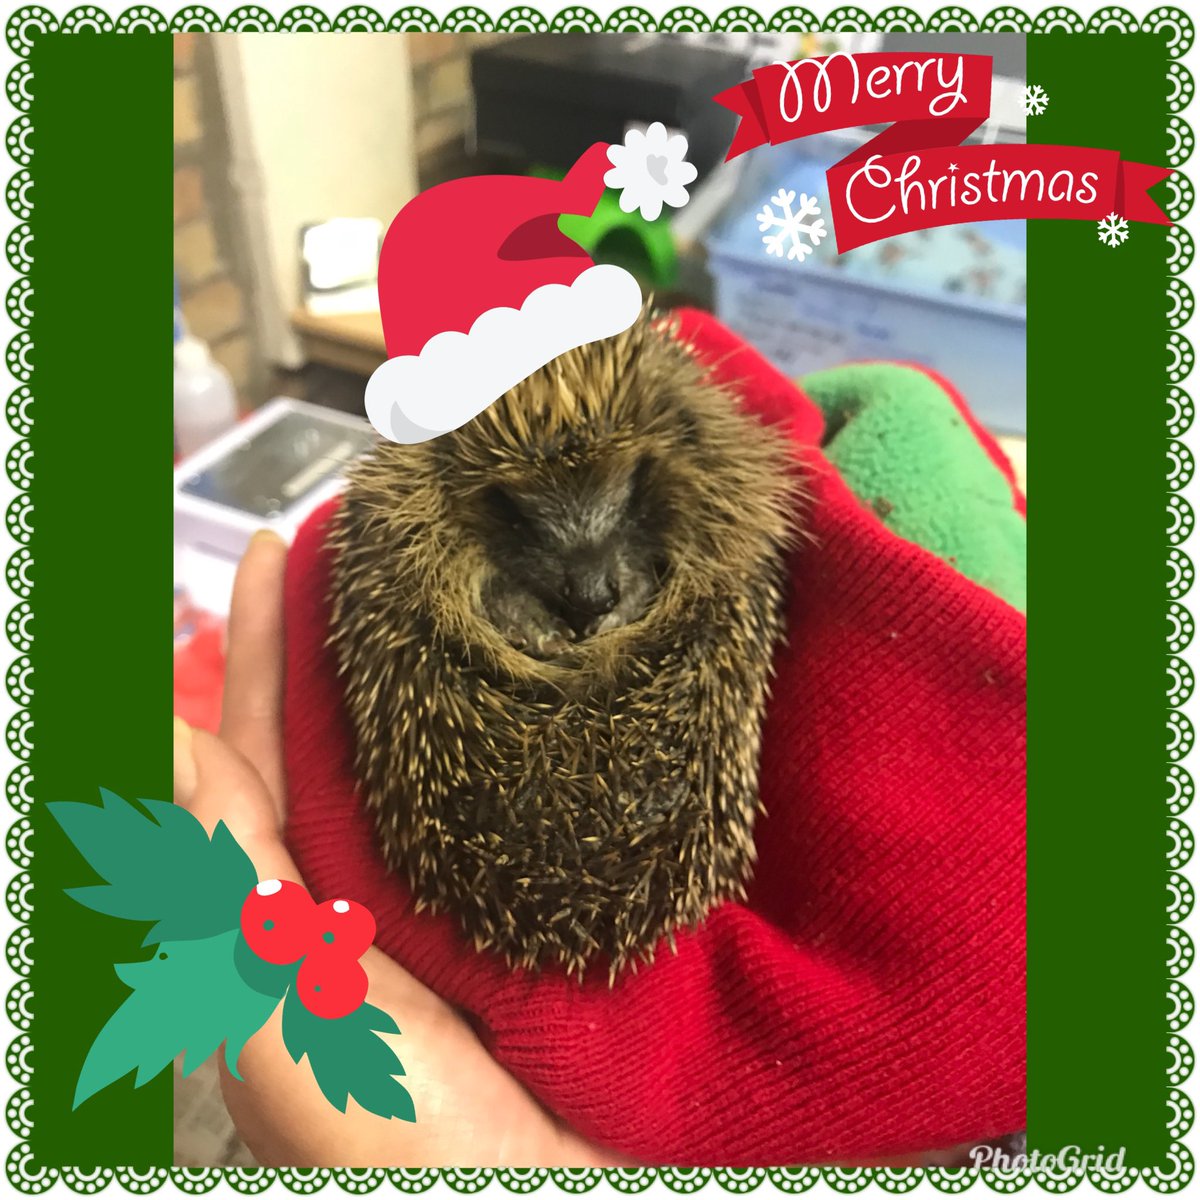 Wishing everyone a very Merry Christmas...#pricklypals